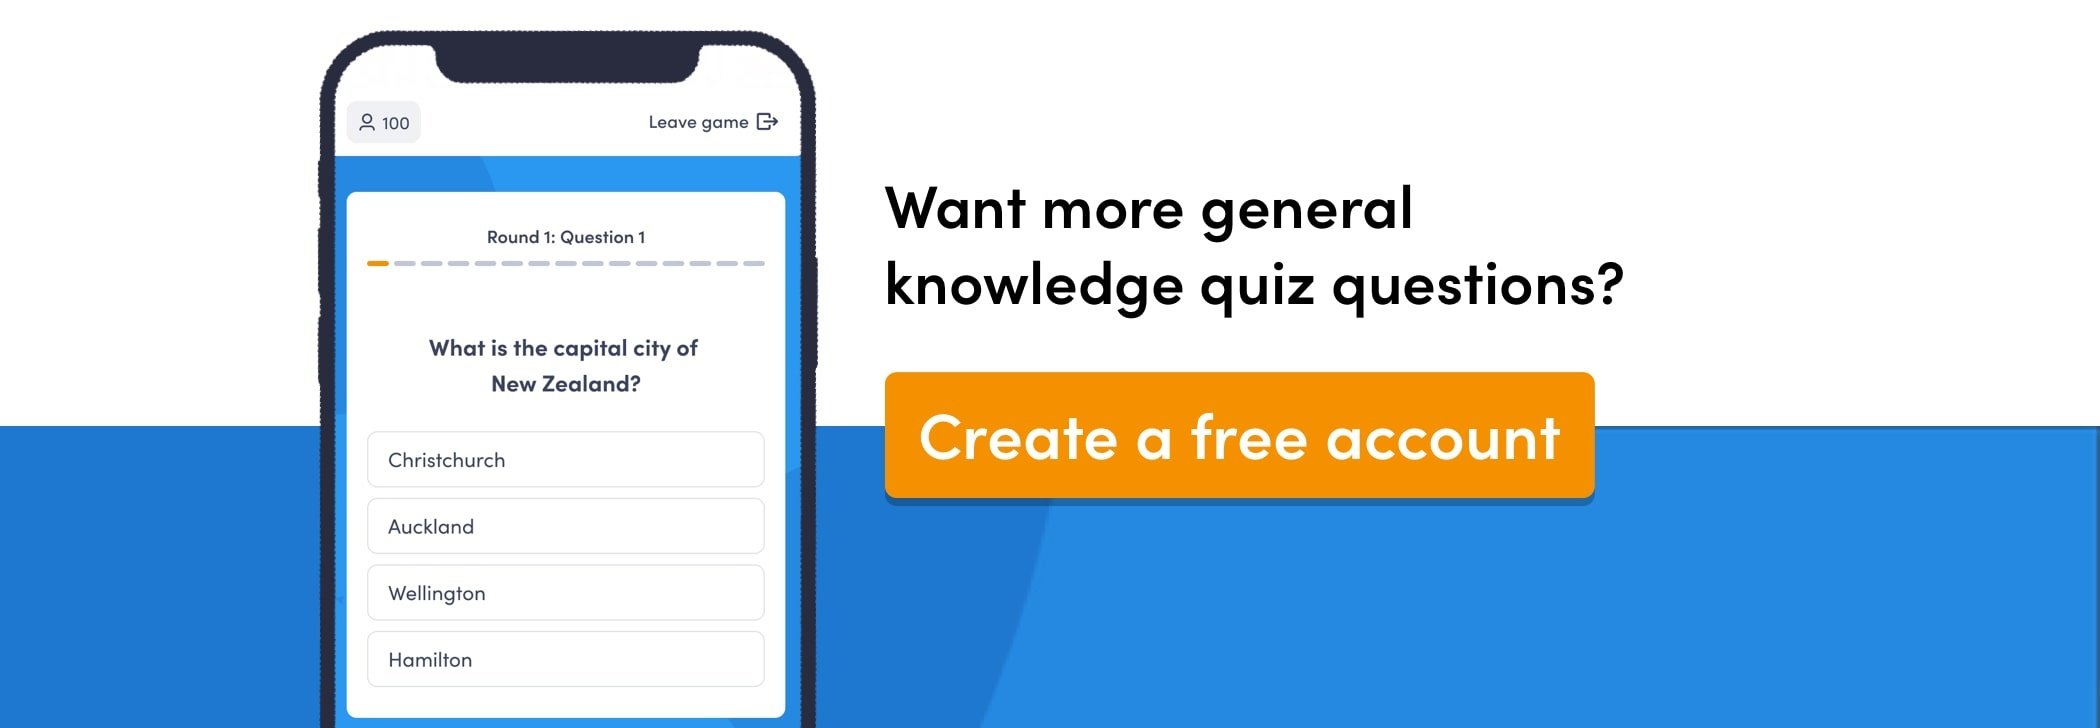 50+ General Knowledge Quiz Questions and Answers (and More!)